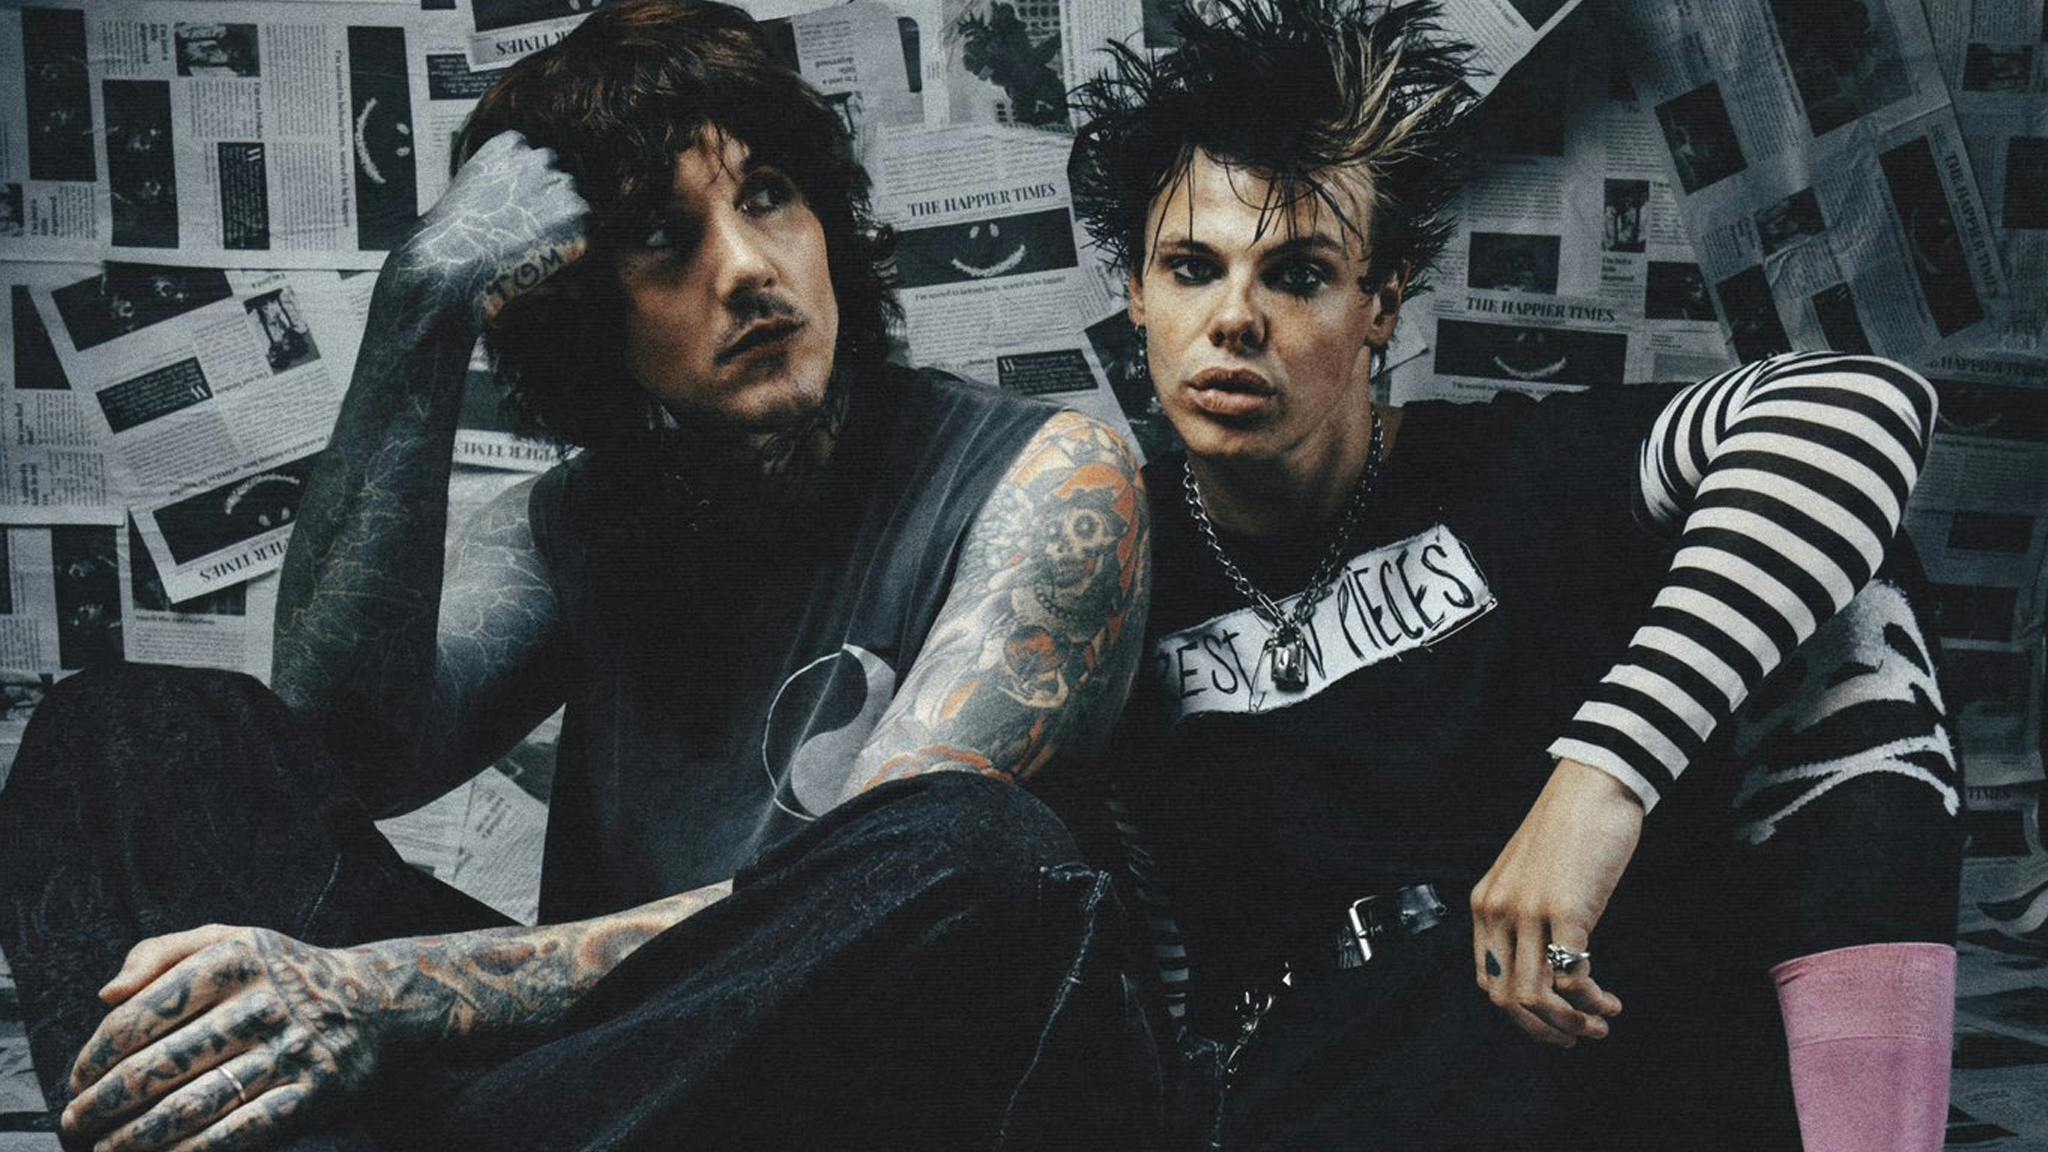 Listen to YUNGBLUD’s new single featuring Oli Sykes